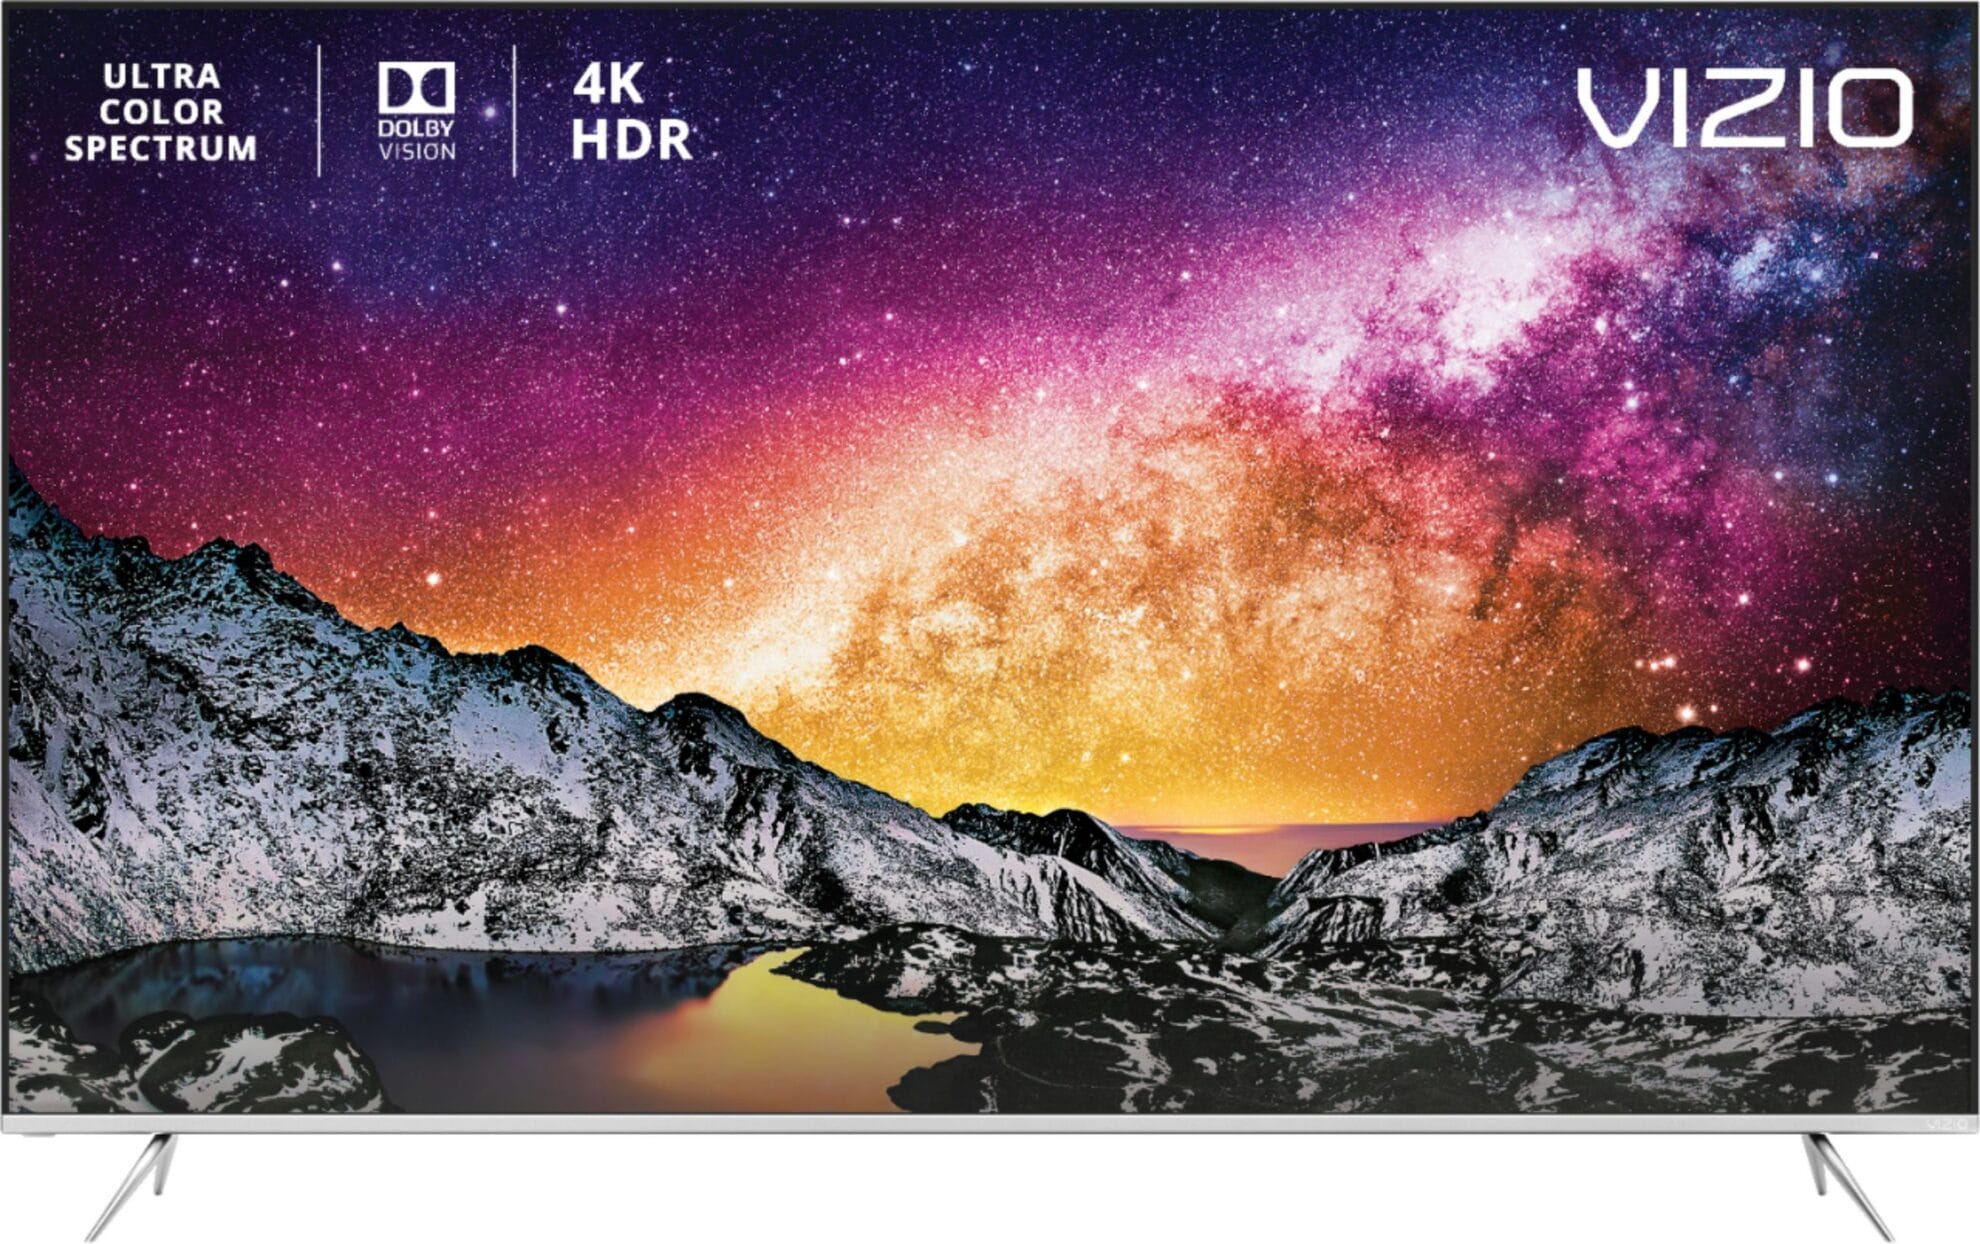 Every pixel is a masterpiece of color, clarity and contrast with the 2018 VIZIO P-Series® 4K HDR Smart TV. Expansive colors, superior HDR performance and pristine 4K detail make each frame a jaw-dropping experience.